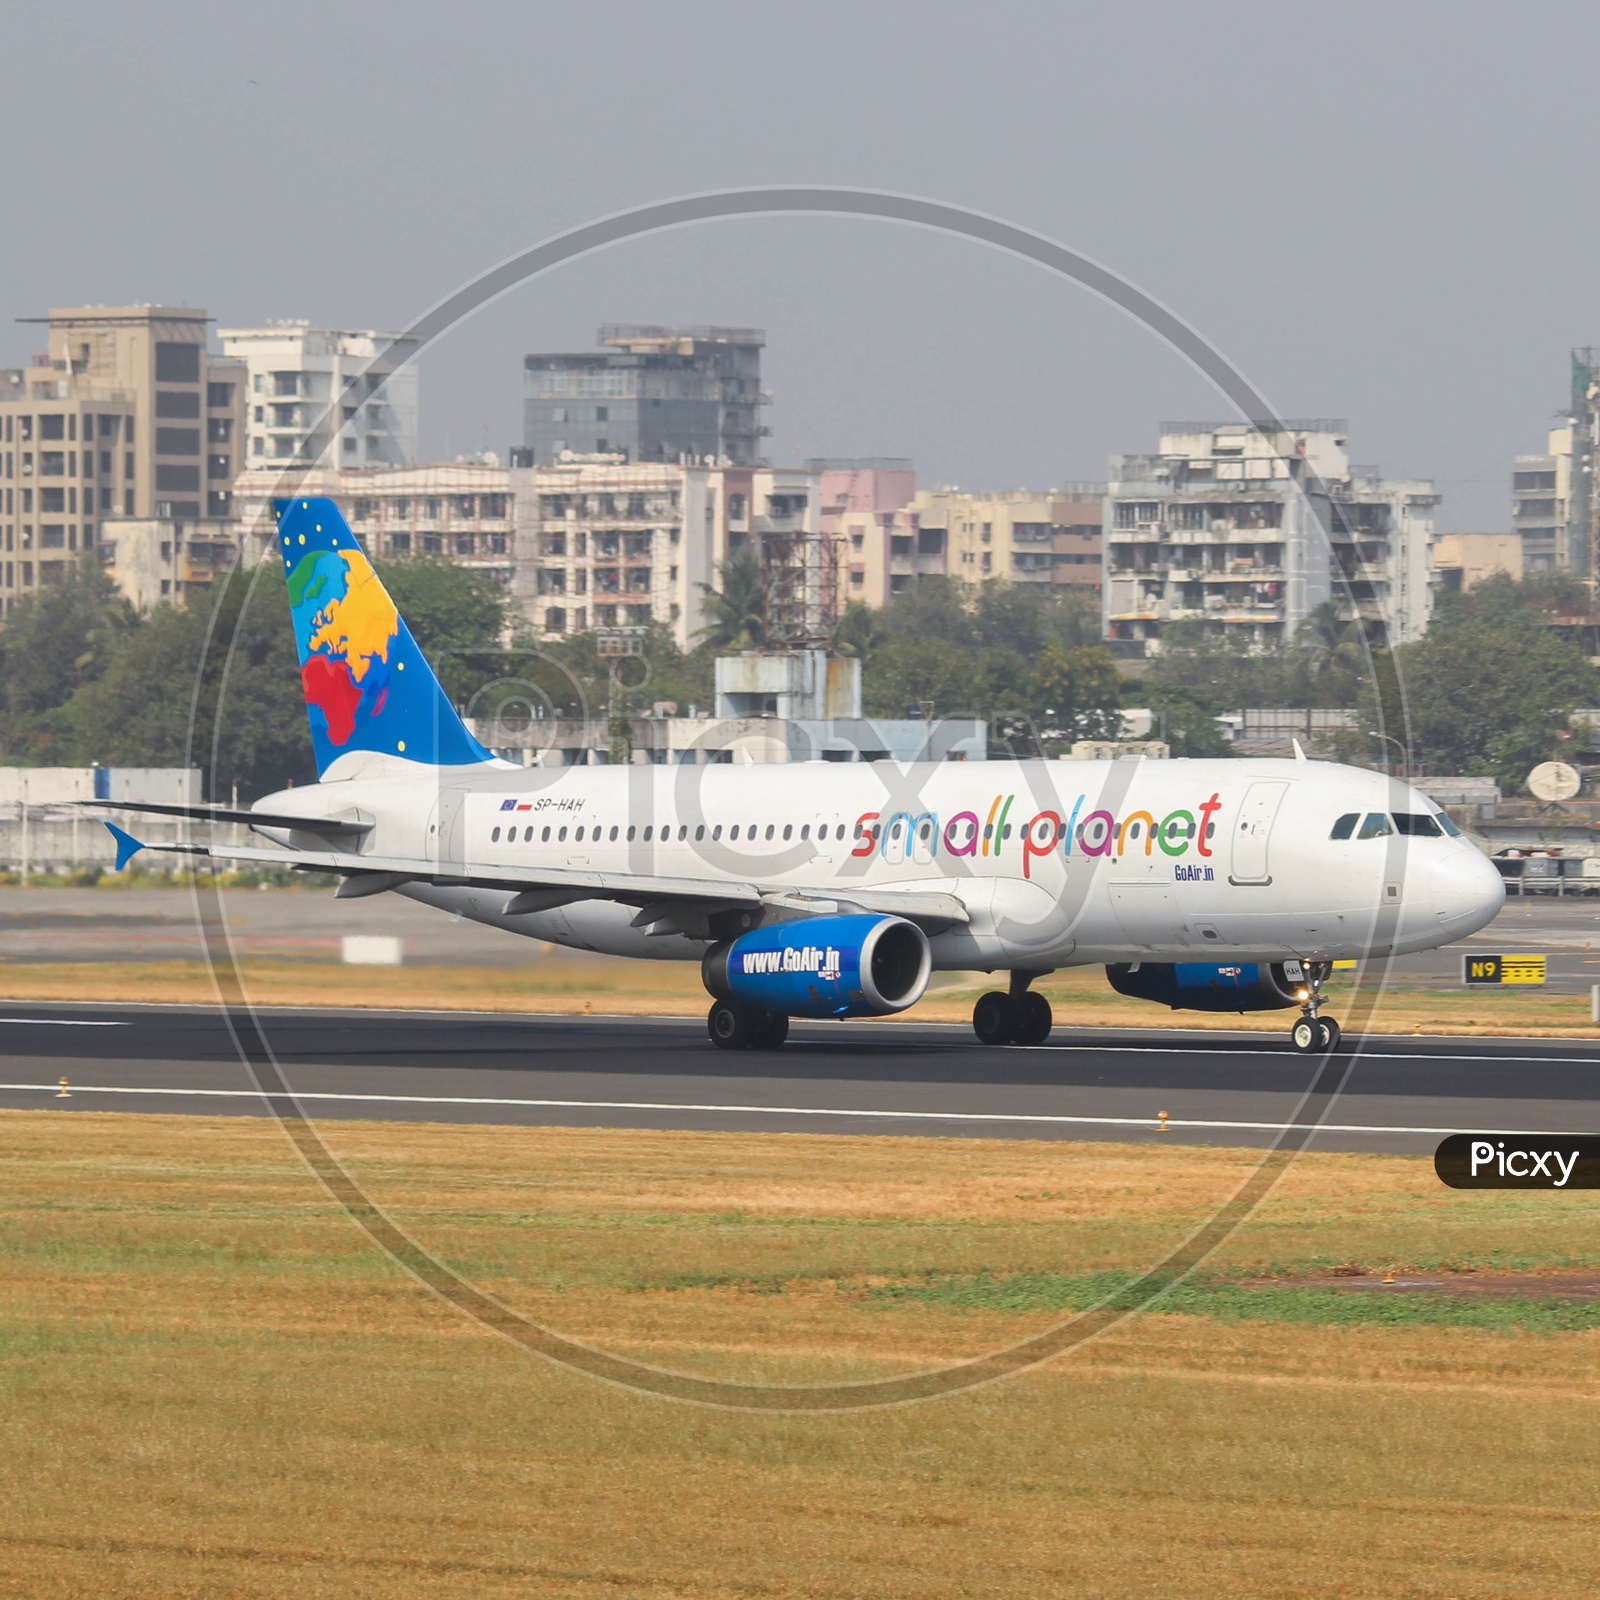 Small planet airlines A320 taking off from Bombay for jaipur.